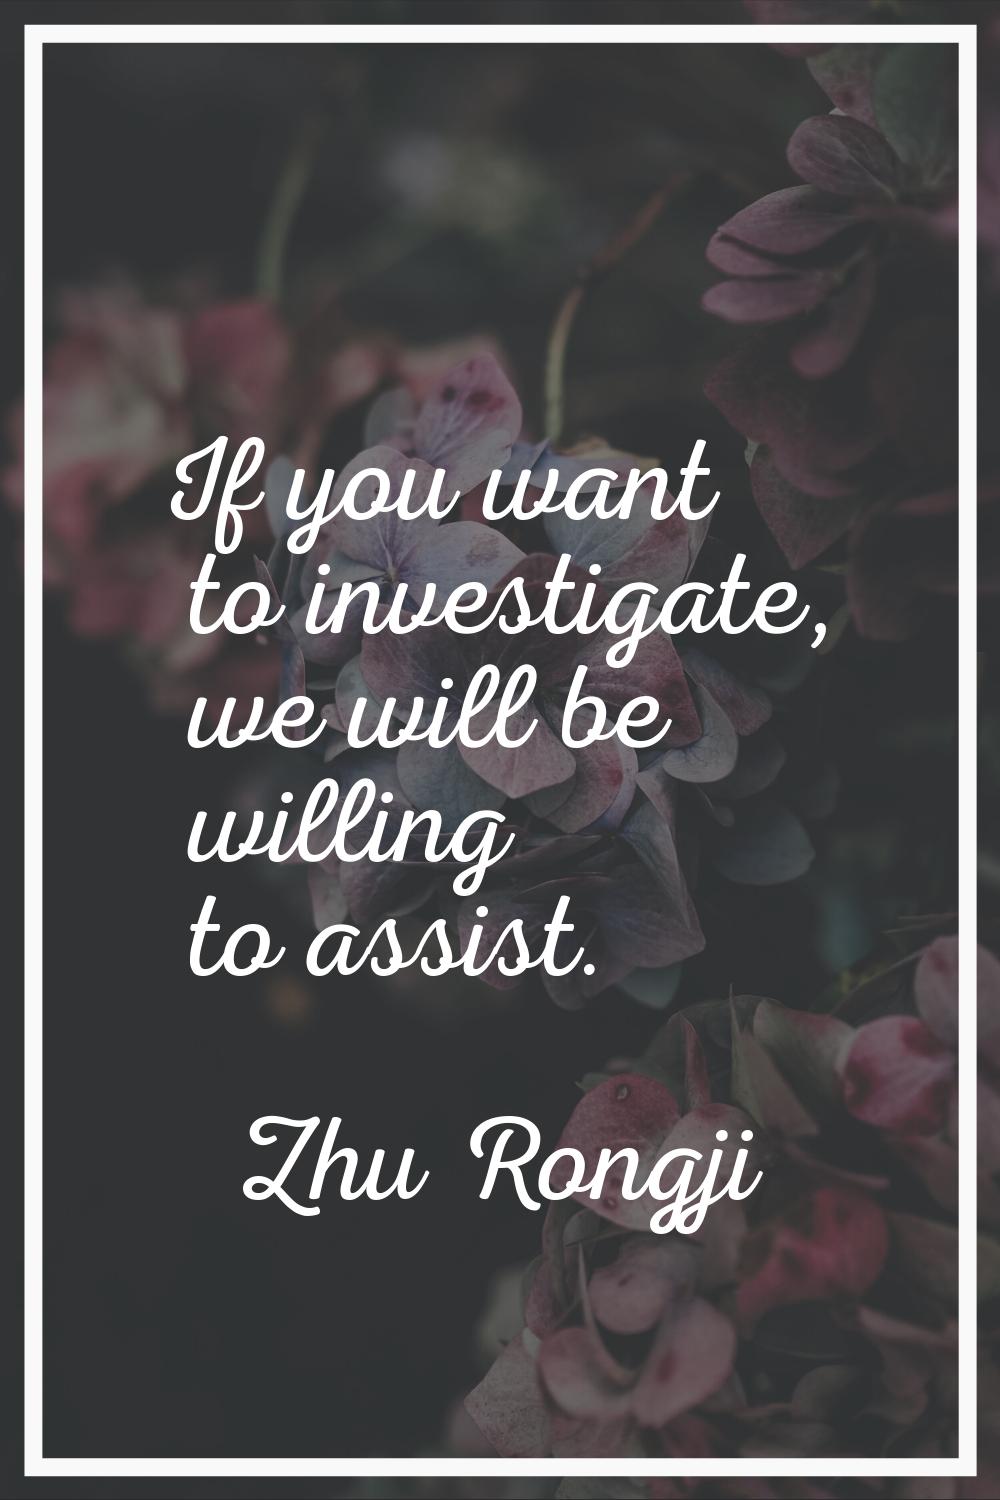 If you want to investigate, we will be willing to assist.